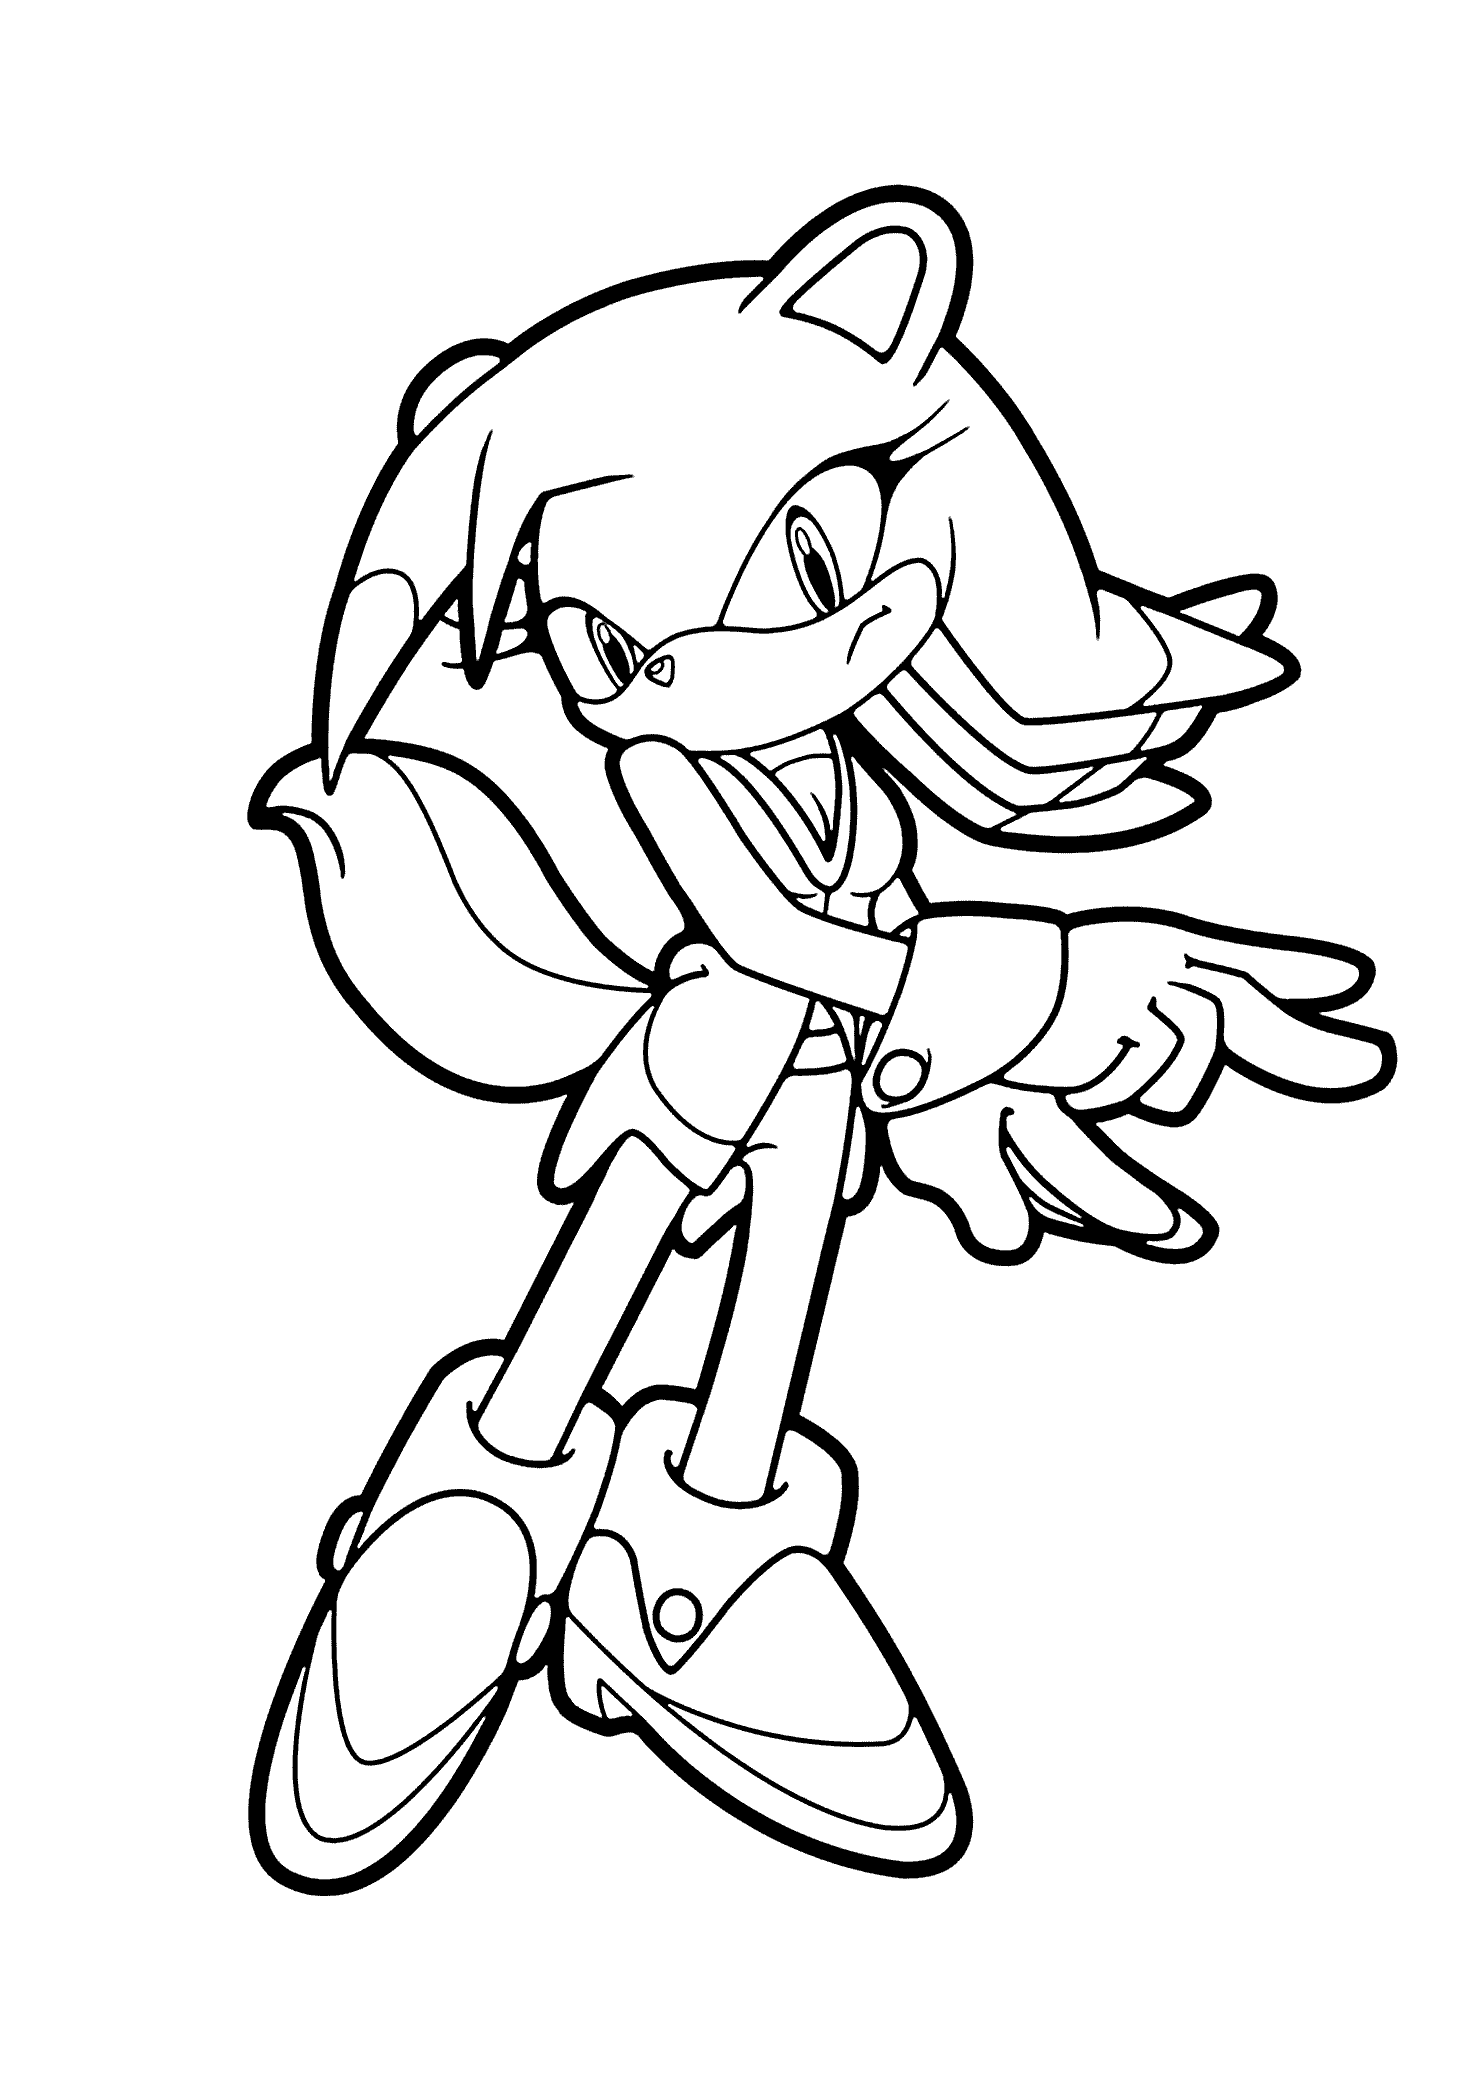 Funny Sonic coloring page for kids